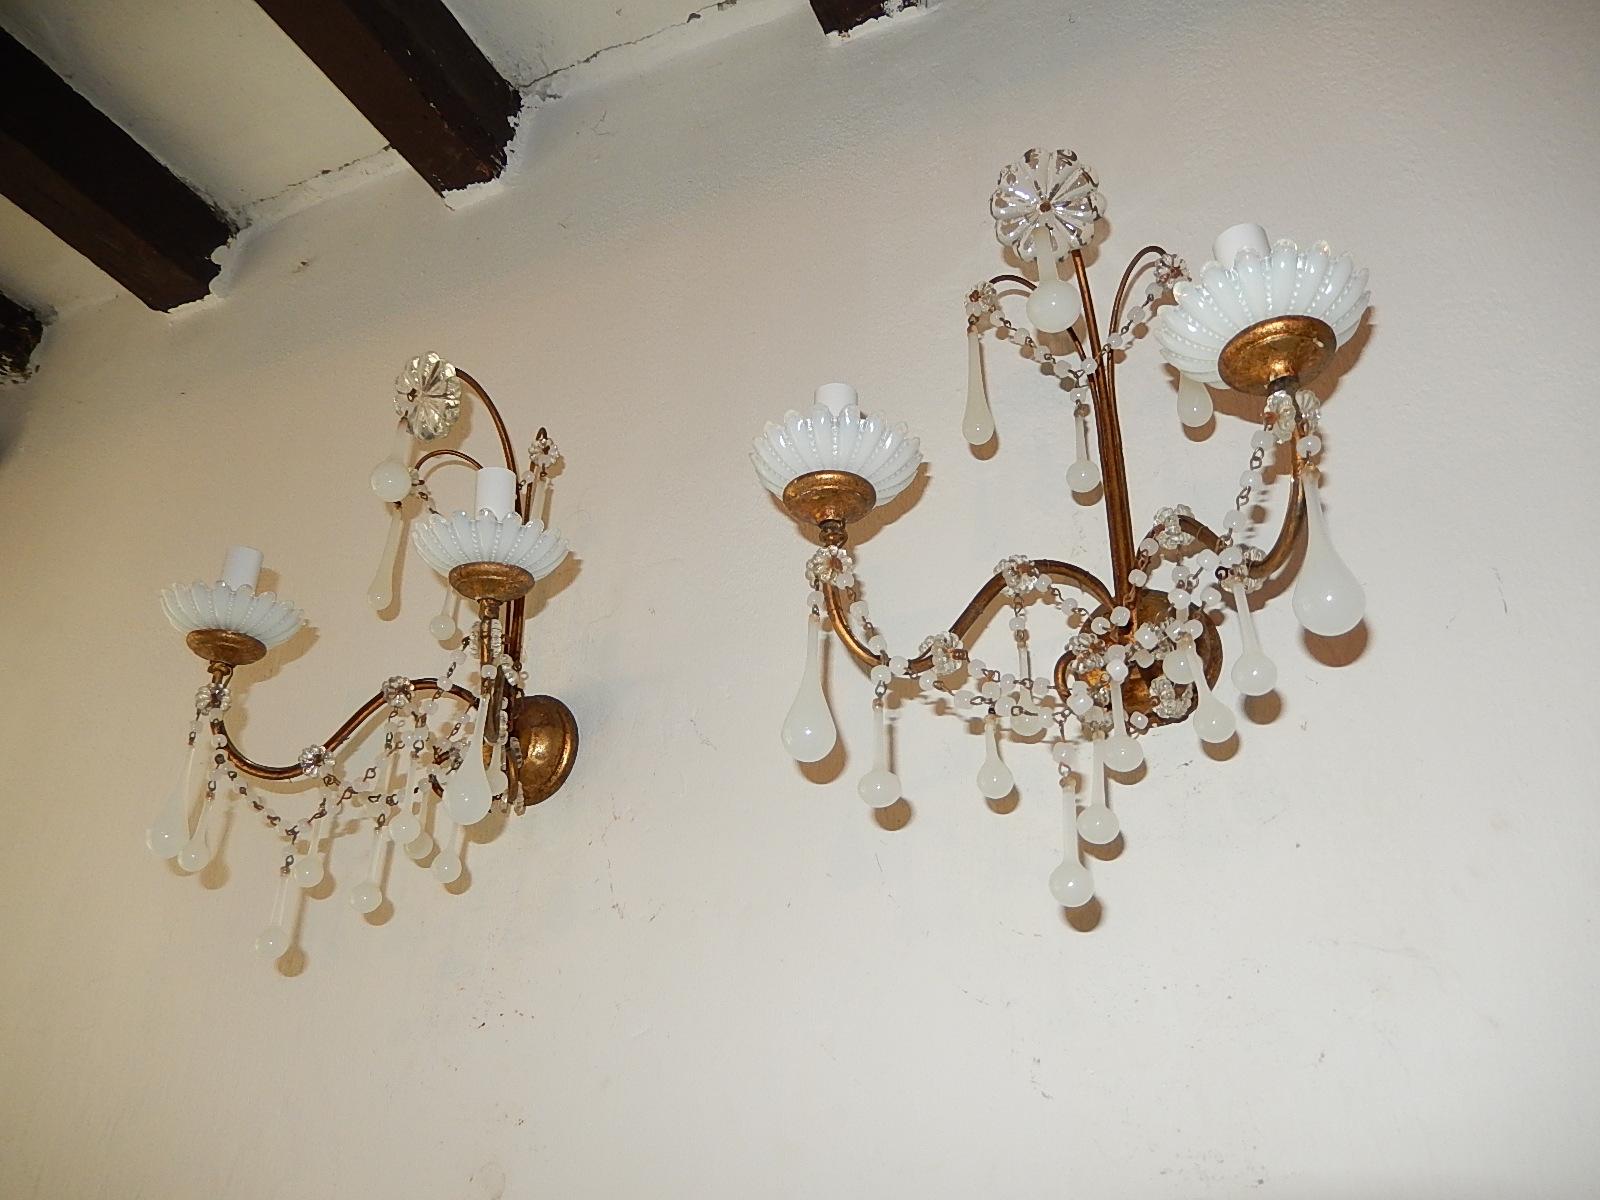 Housing two lights each. Will be rewired with appropriate sockets for country and ready to hang. White opaline bobeches, drops and swags of beads. Giltwood posts and back plate. Big crystal floret on top. Free priority UPS shipping from Italy, no